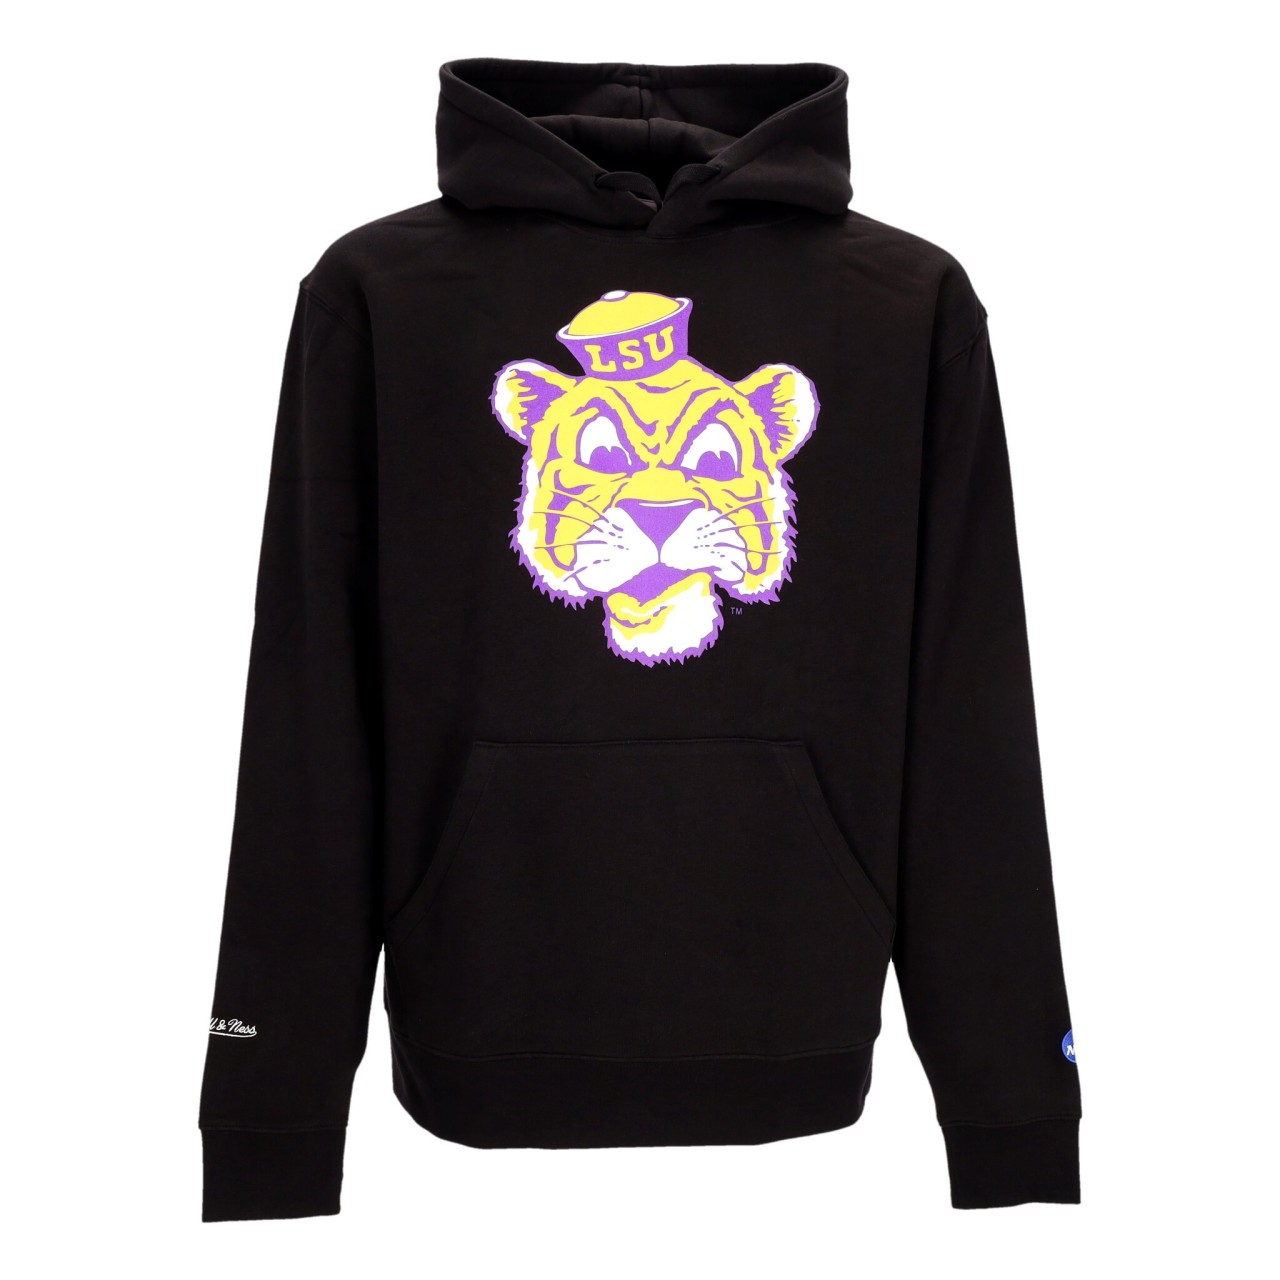 MITCHELL & NESS NCAA LARGE LOGO HOODIE LOUTIG HDSSINTL1271-LSUBLCK